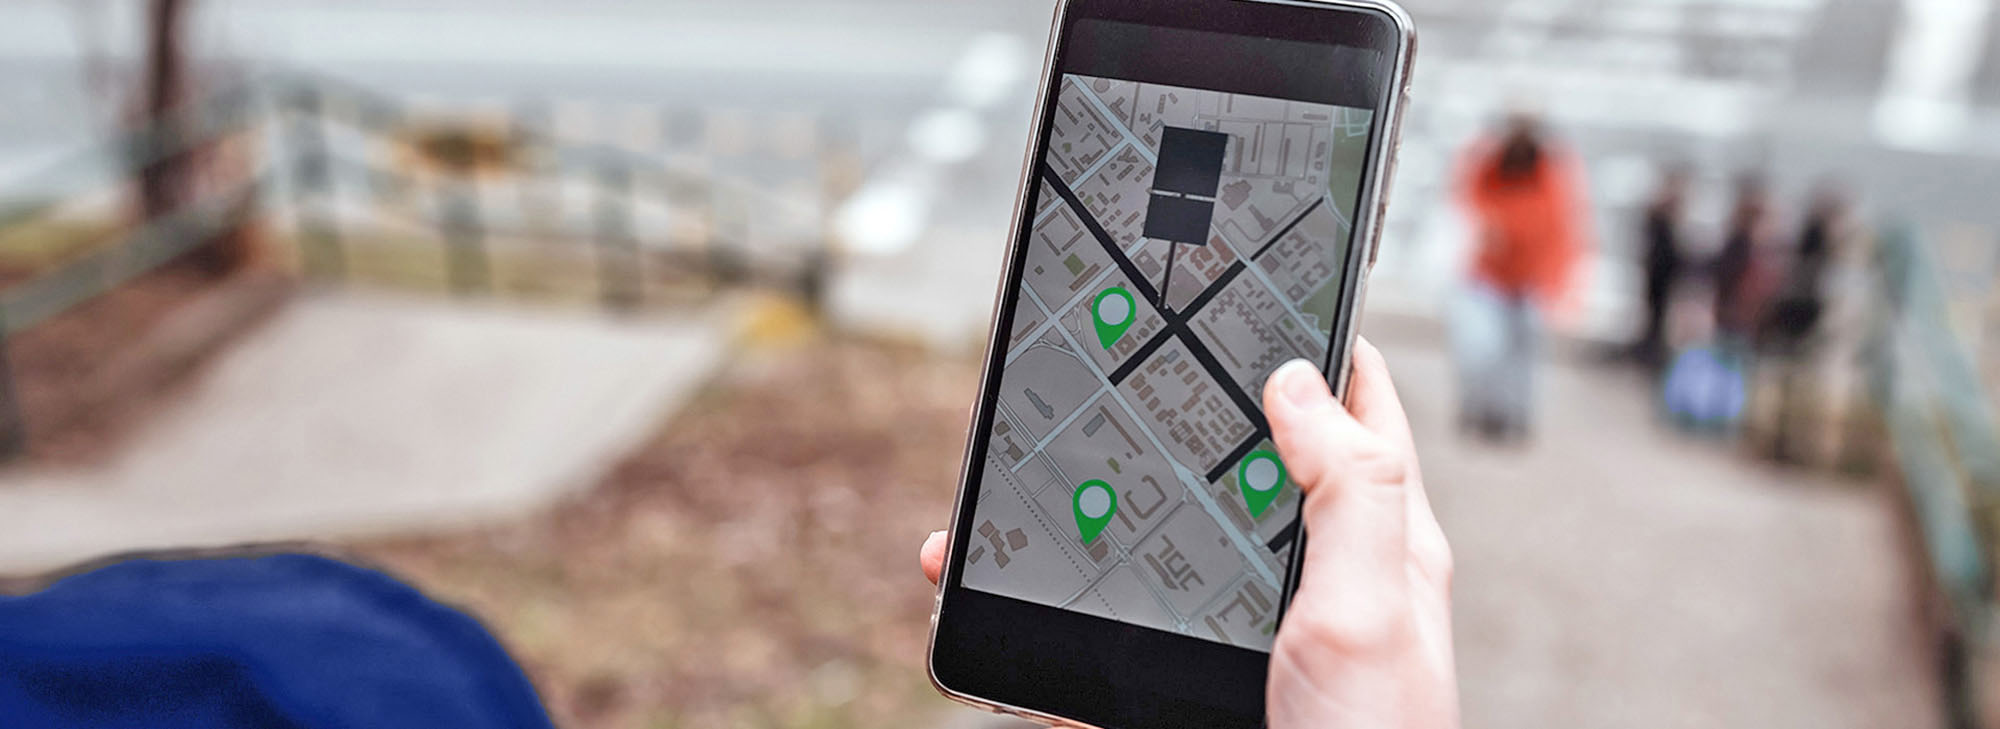 Person using map in phone app to navigate and find GPS location service